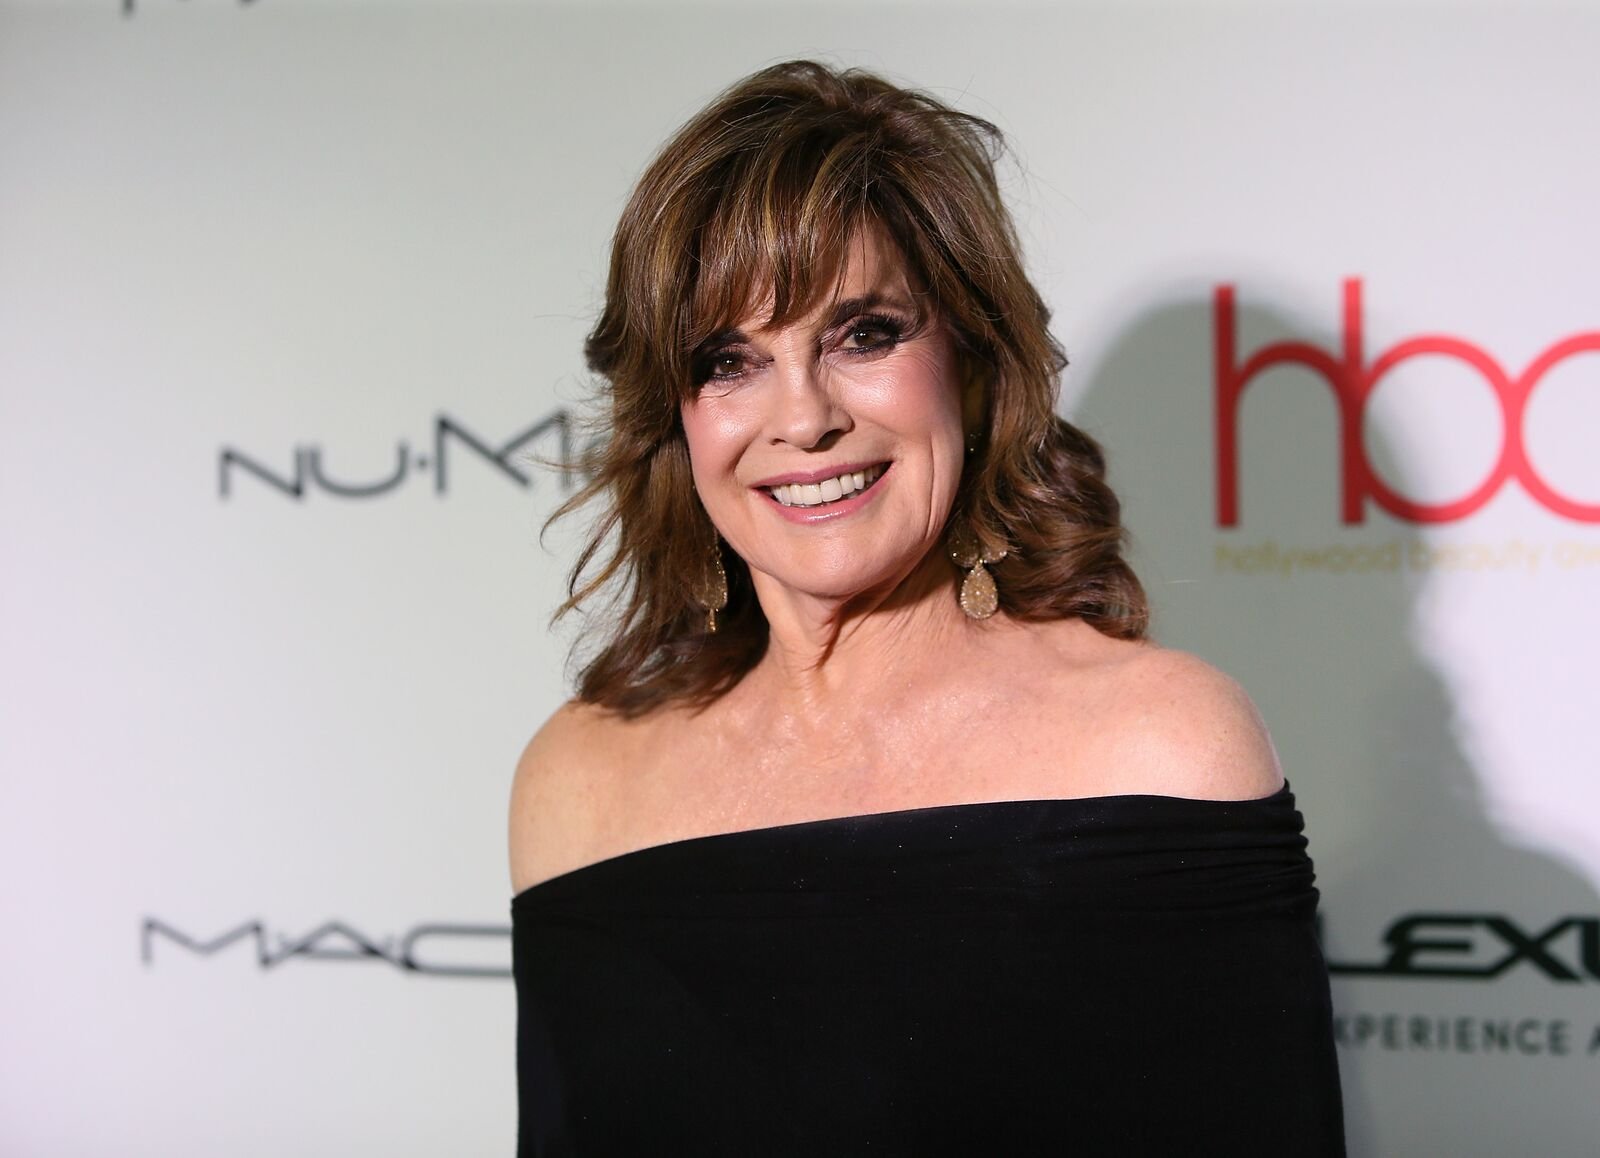 Actress Linda Gray attends the 3rd Annual Hollywood Beauty Awards at Avalon Hollywood on February 19, 2017 in Los Angeles, California | Photo: Getty Images